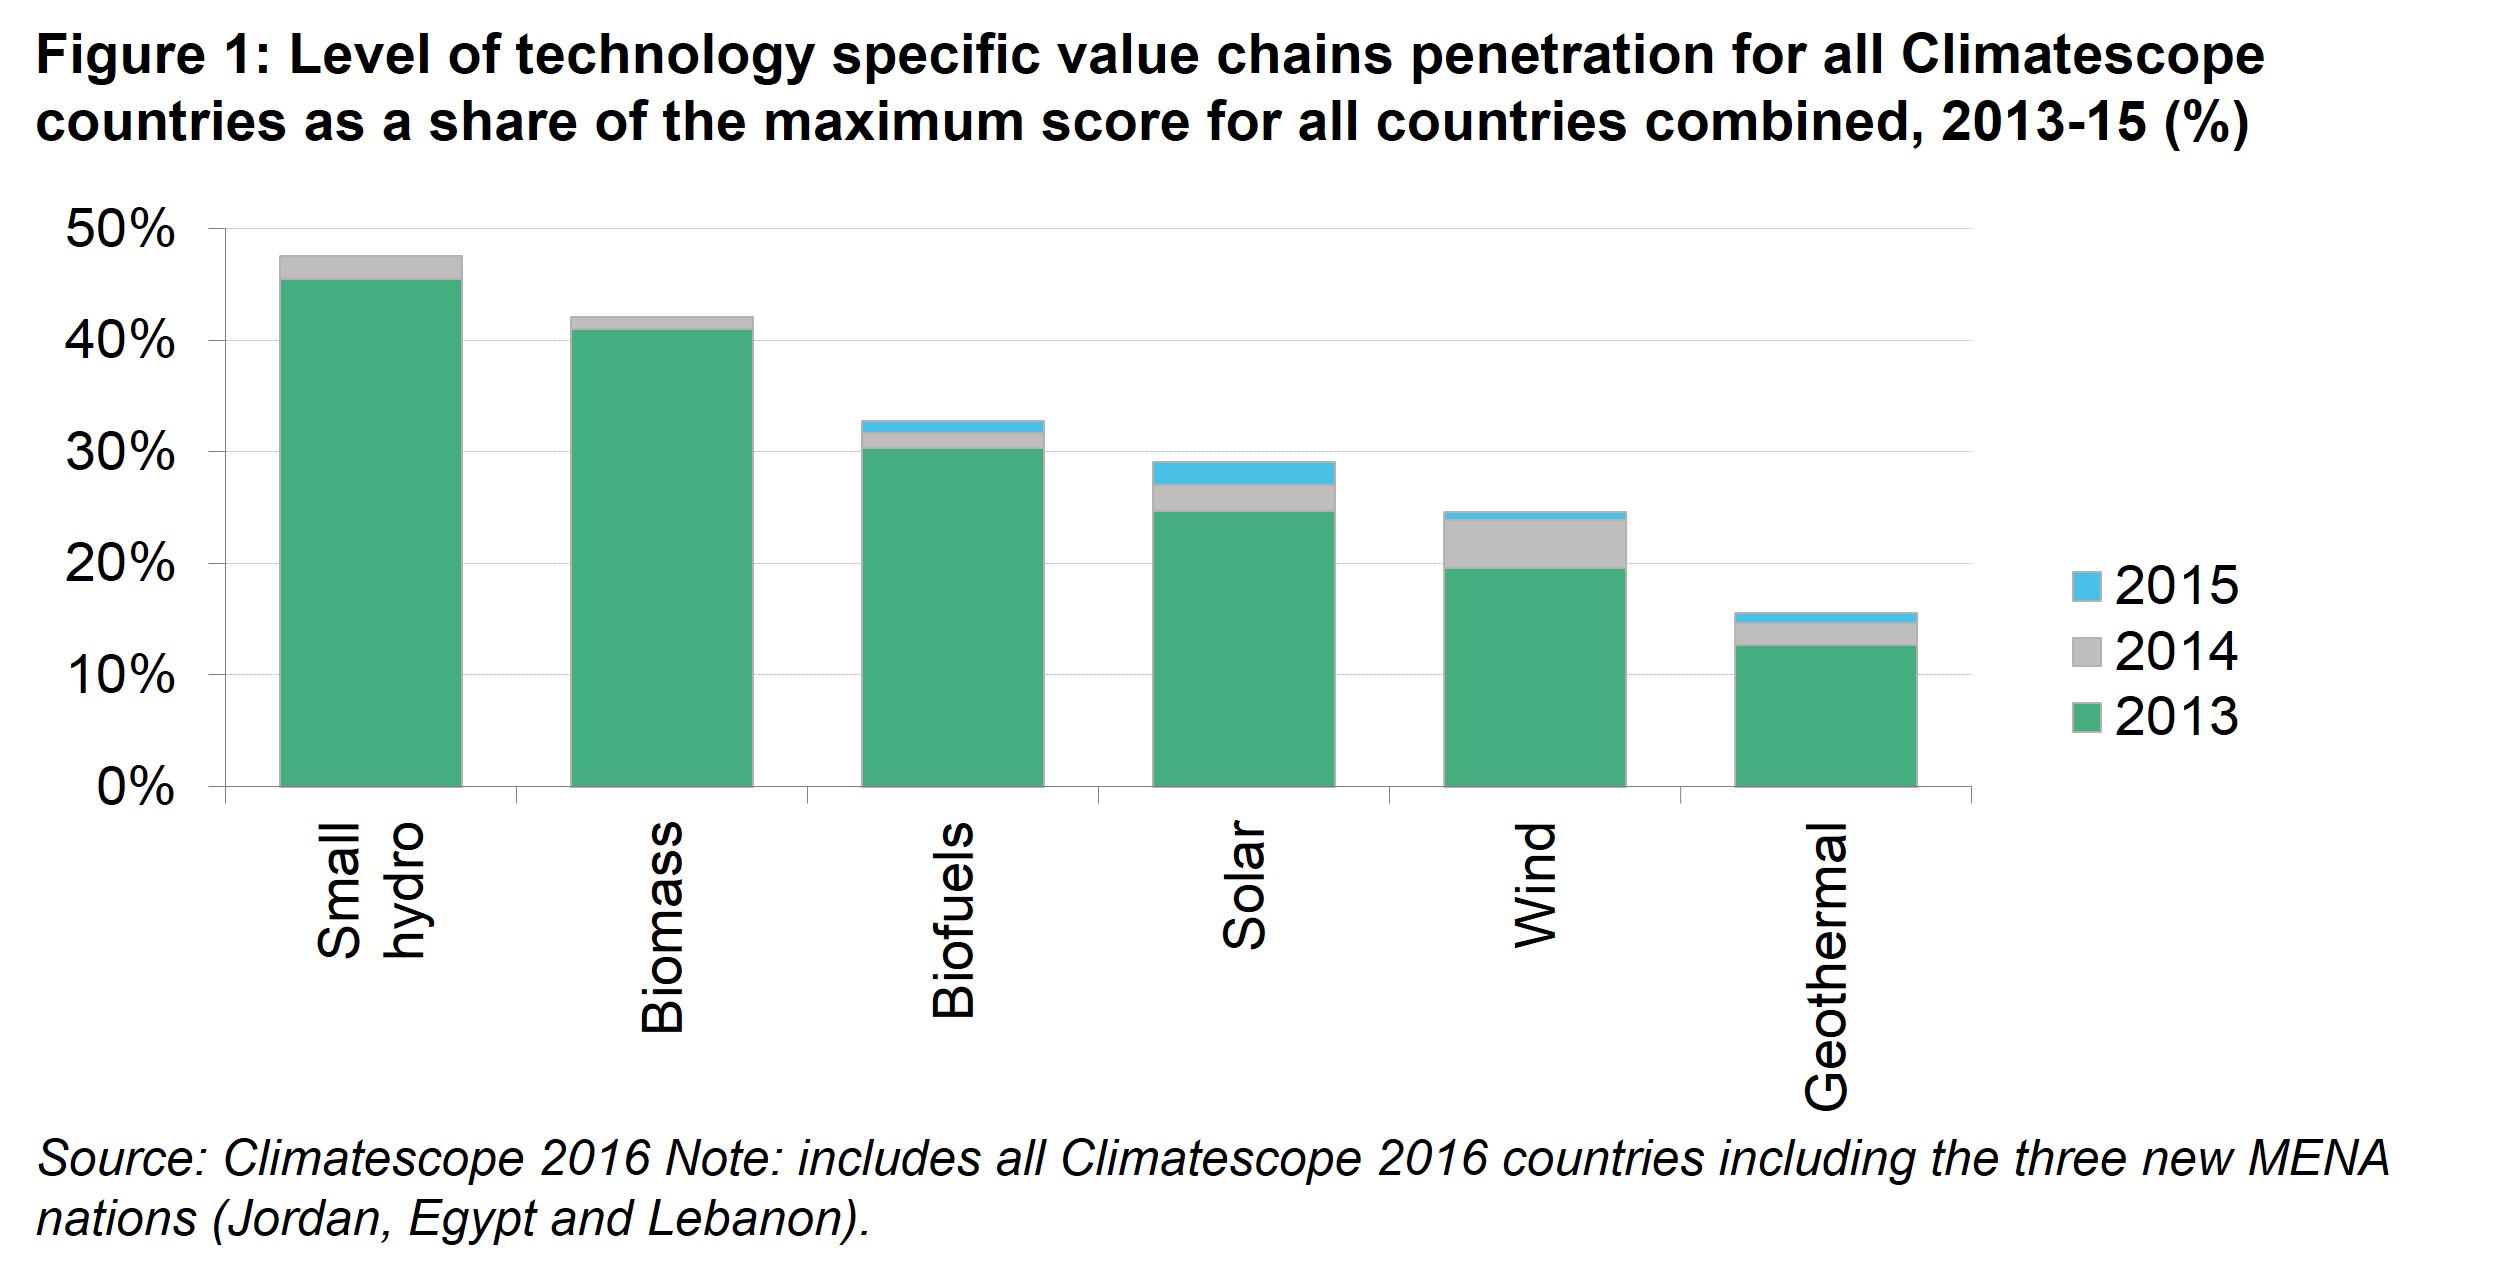 PIII Fig 1 - Completeness of technology specific value chains for all Climatescope countries as a share of the maximum score for all countries combined, 2013-15 (%)